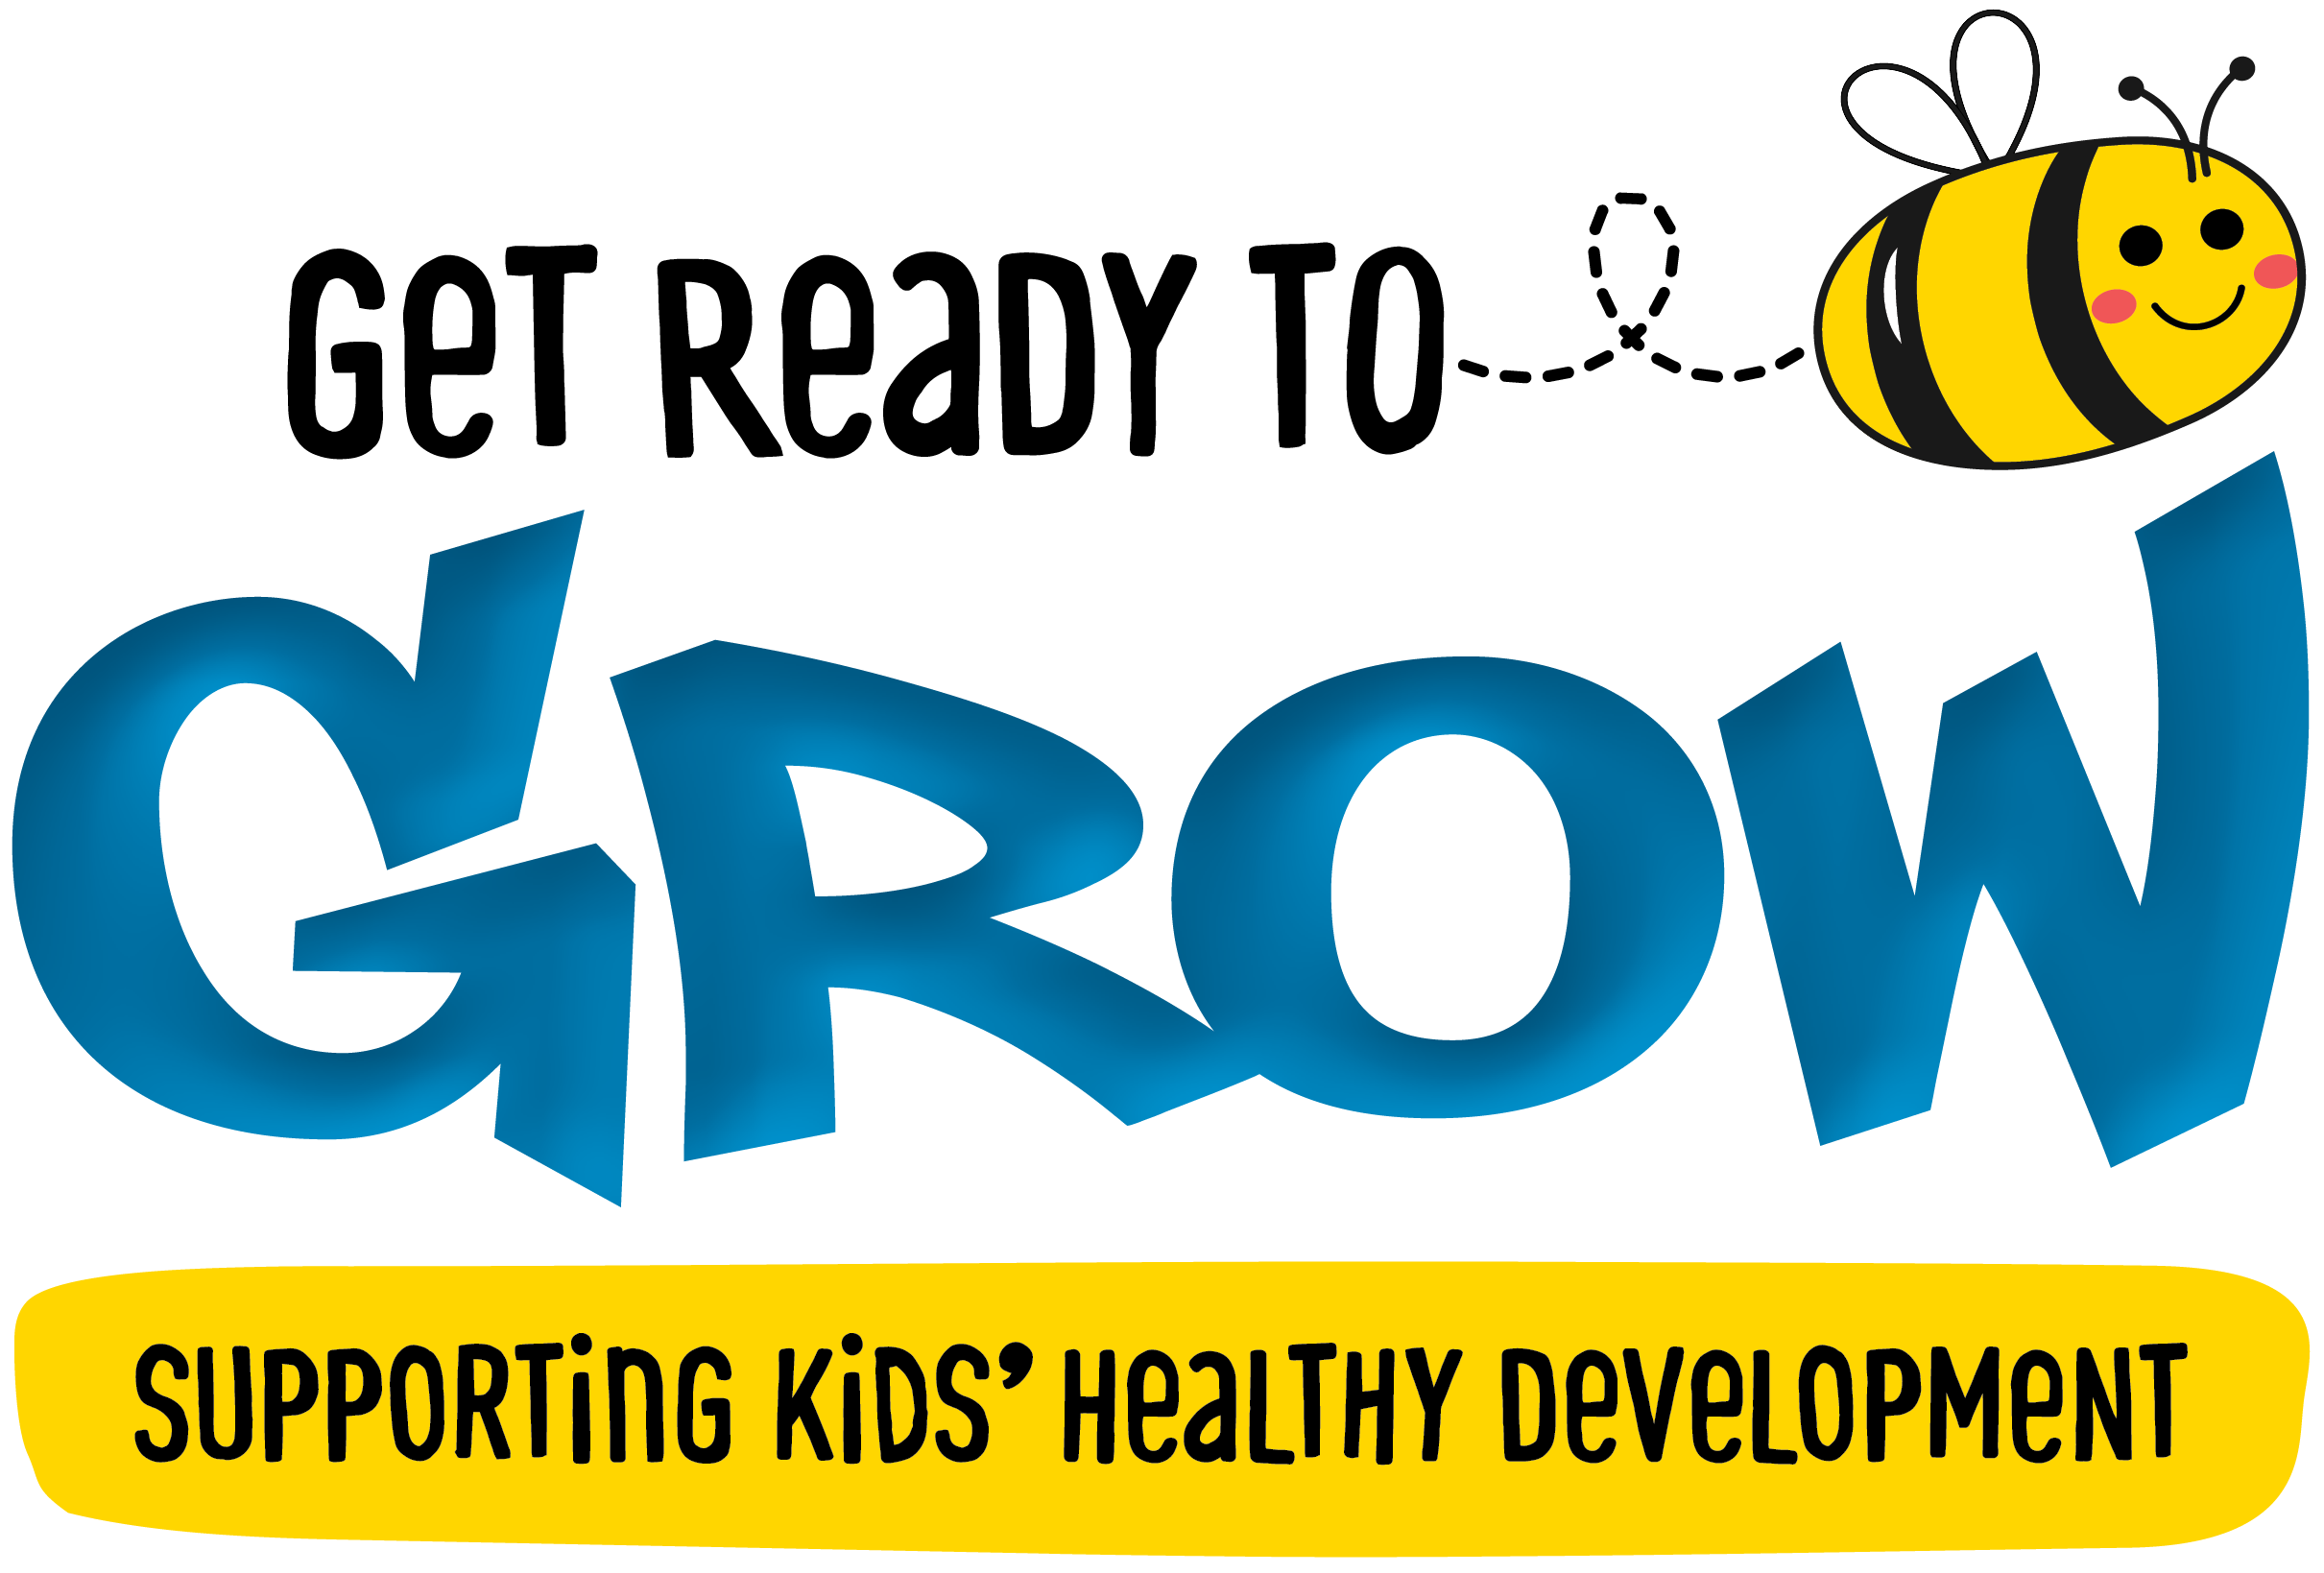 Get Ready to Grow, Supporting Kids Healthy Development